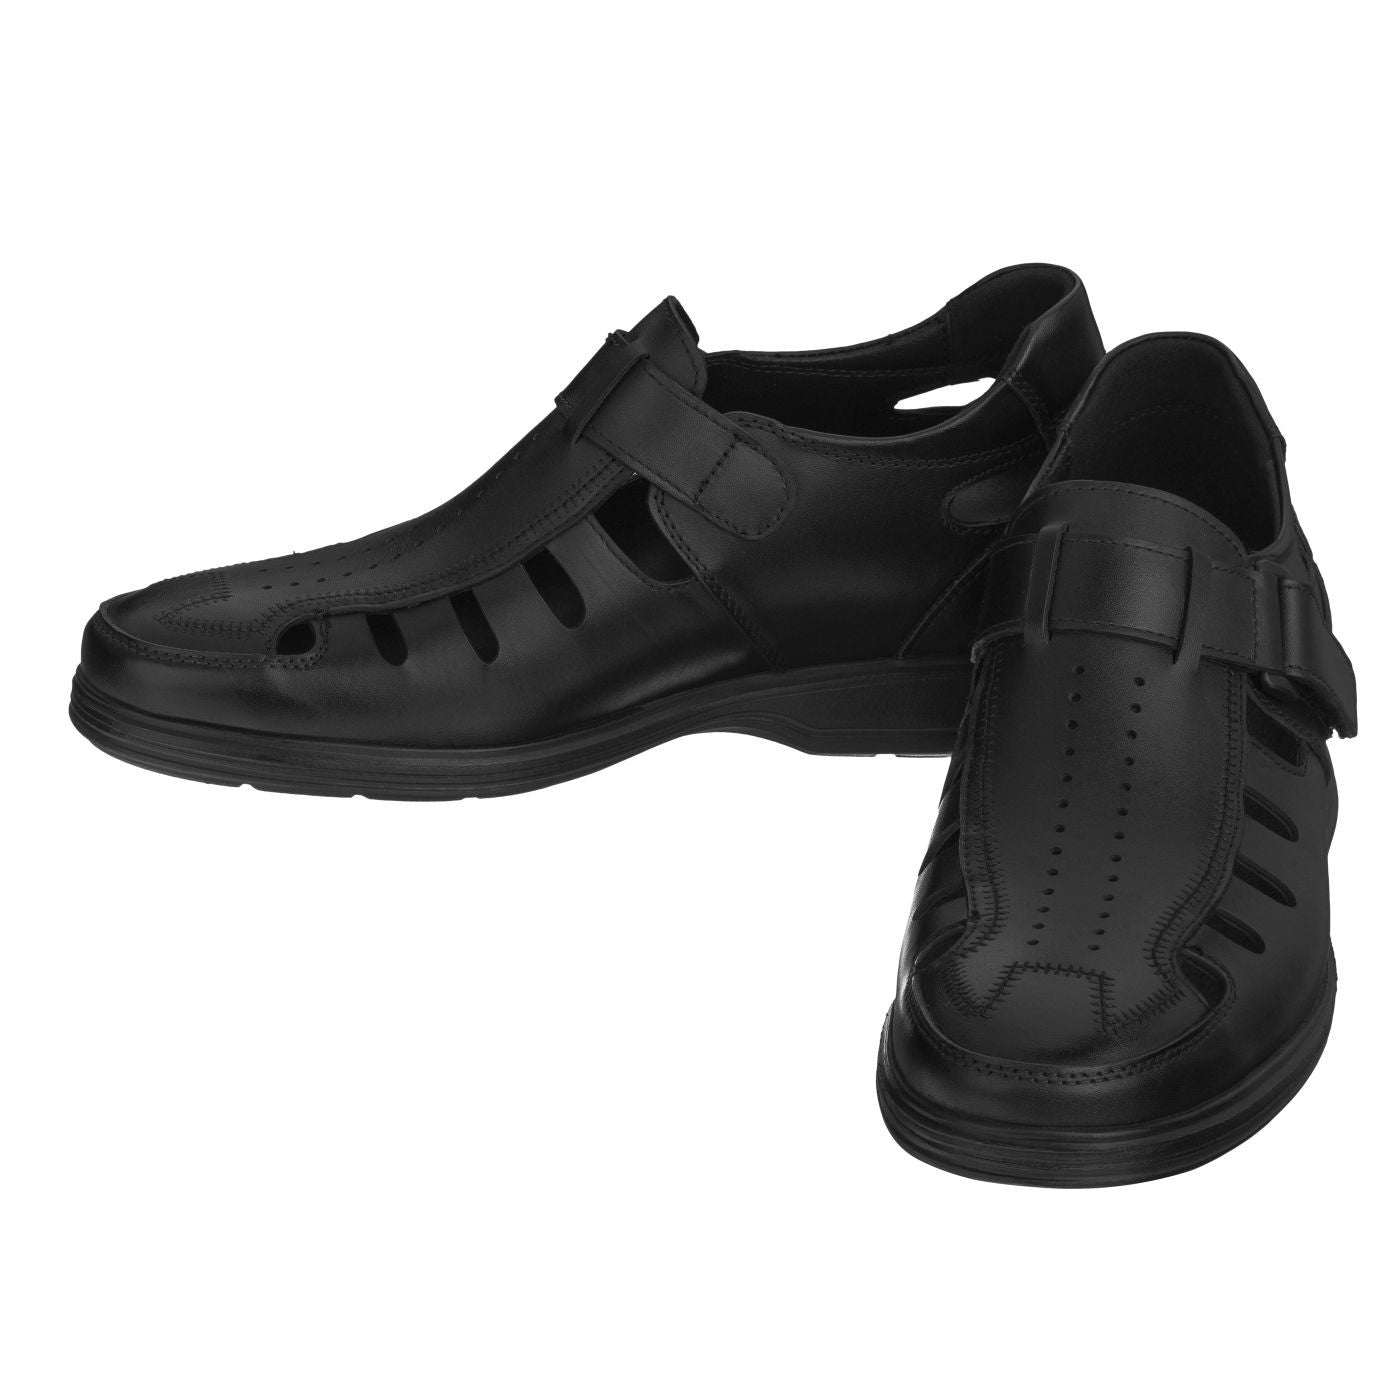 Elevator shoes height increase CALTO - S1050 - 2.8 Inches Taller (Black) - Super Lightweight